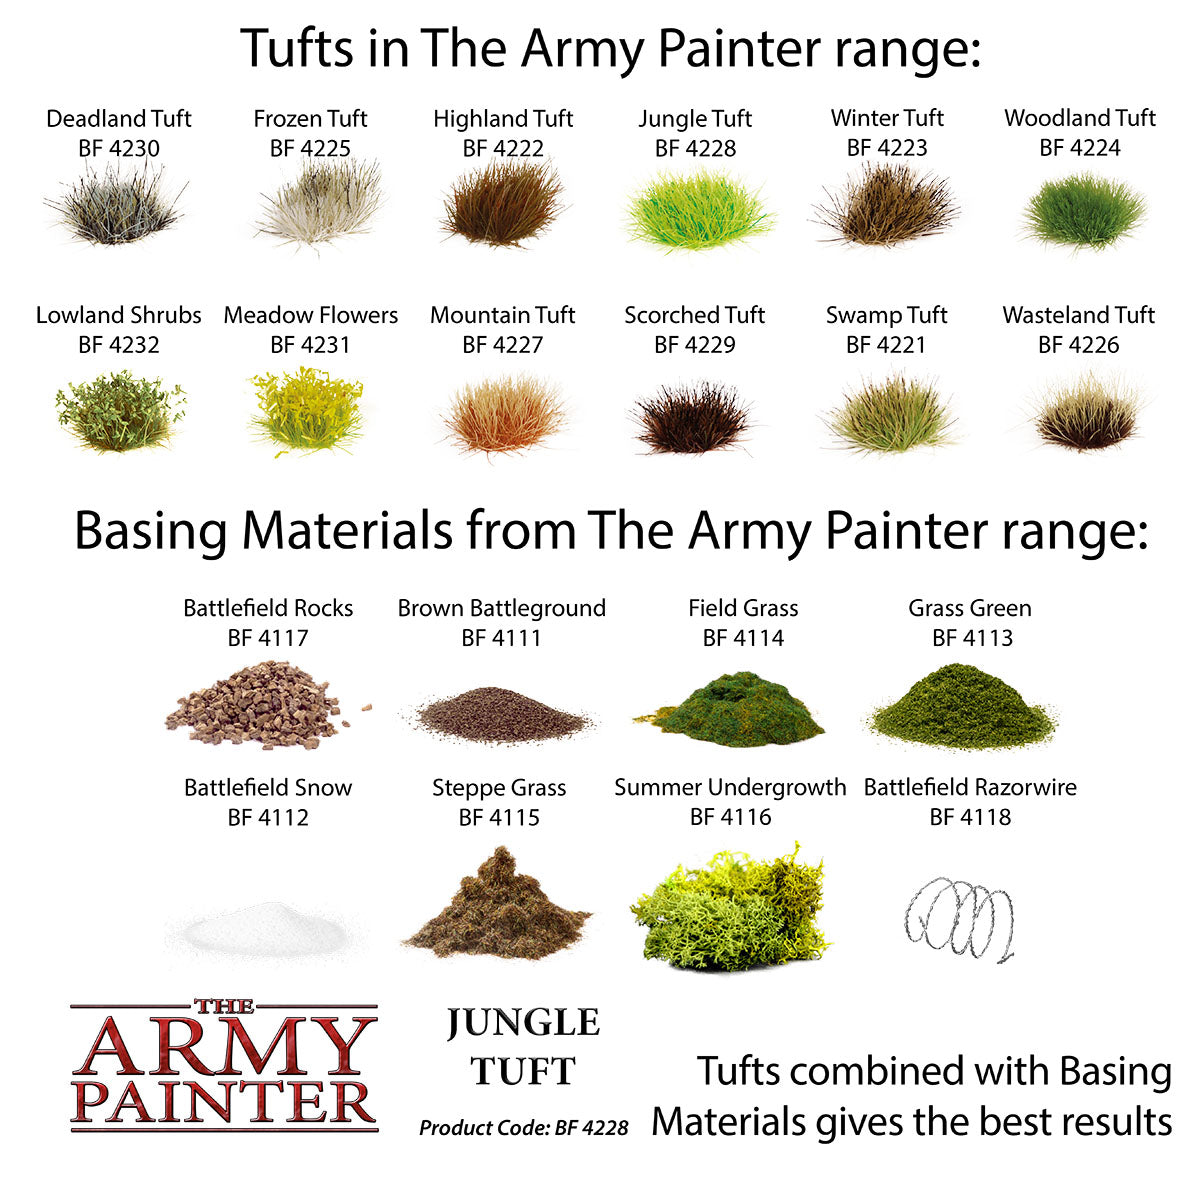 The Army Painter - Jungle Tuft BF4228